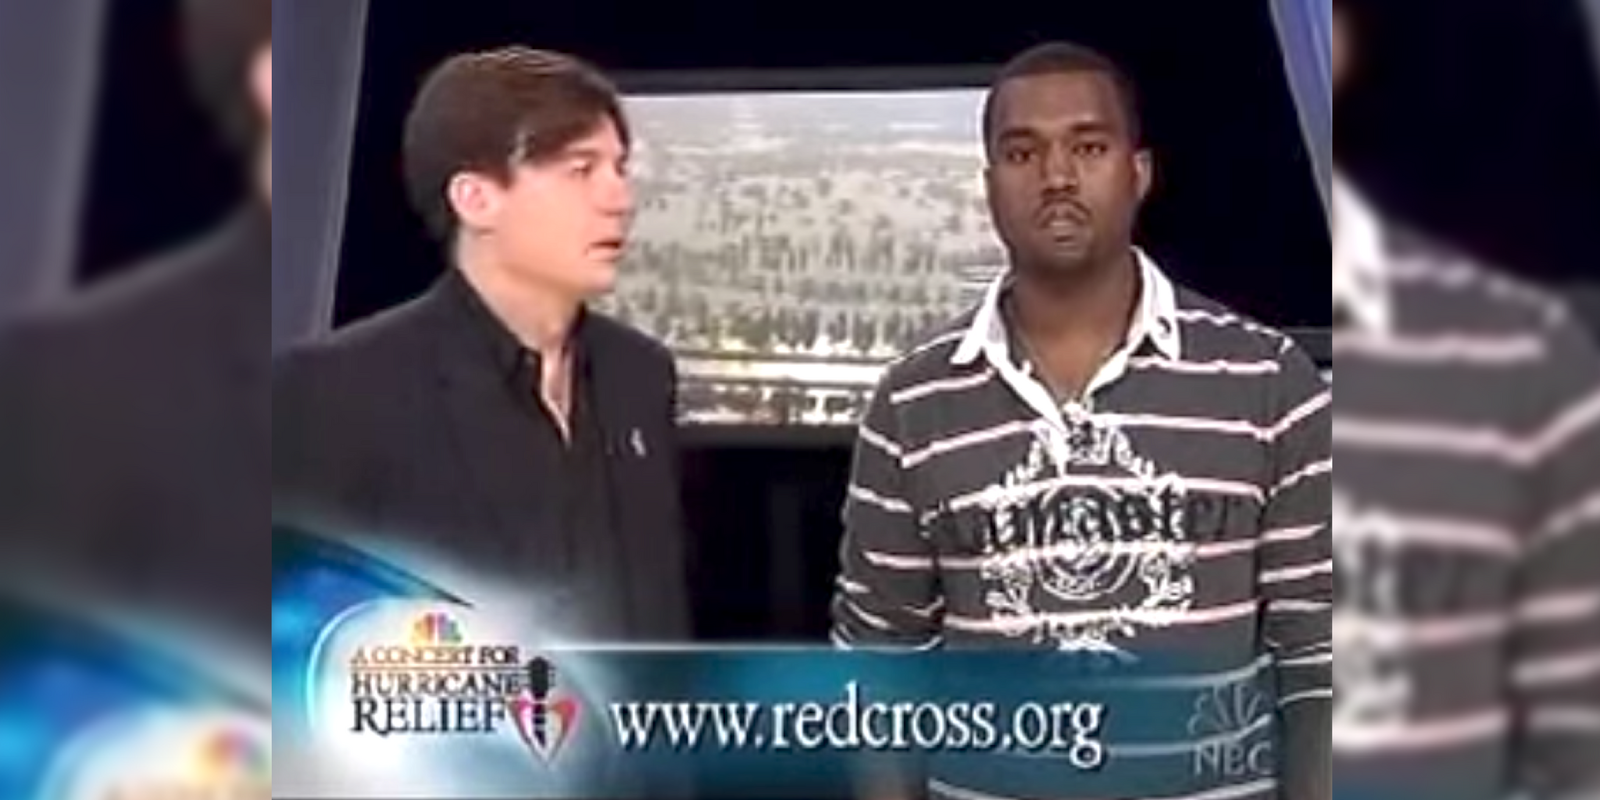 Kanye West says 'George Bush doesn't care about Black people' during a live Hurricane Katrina fundraiser